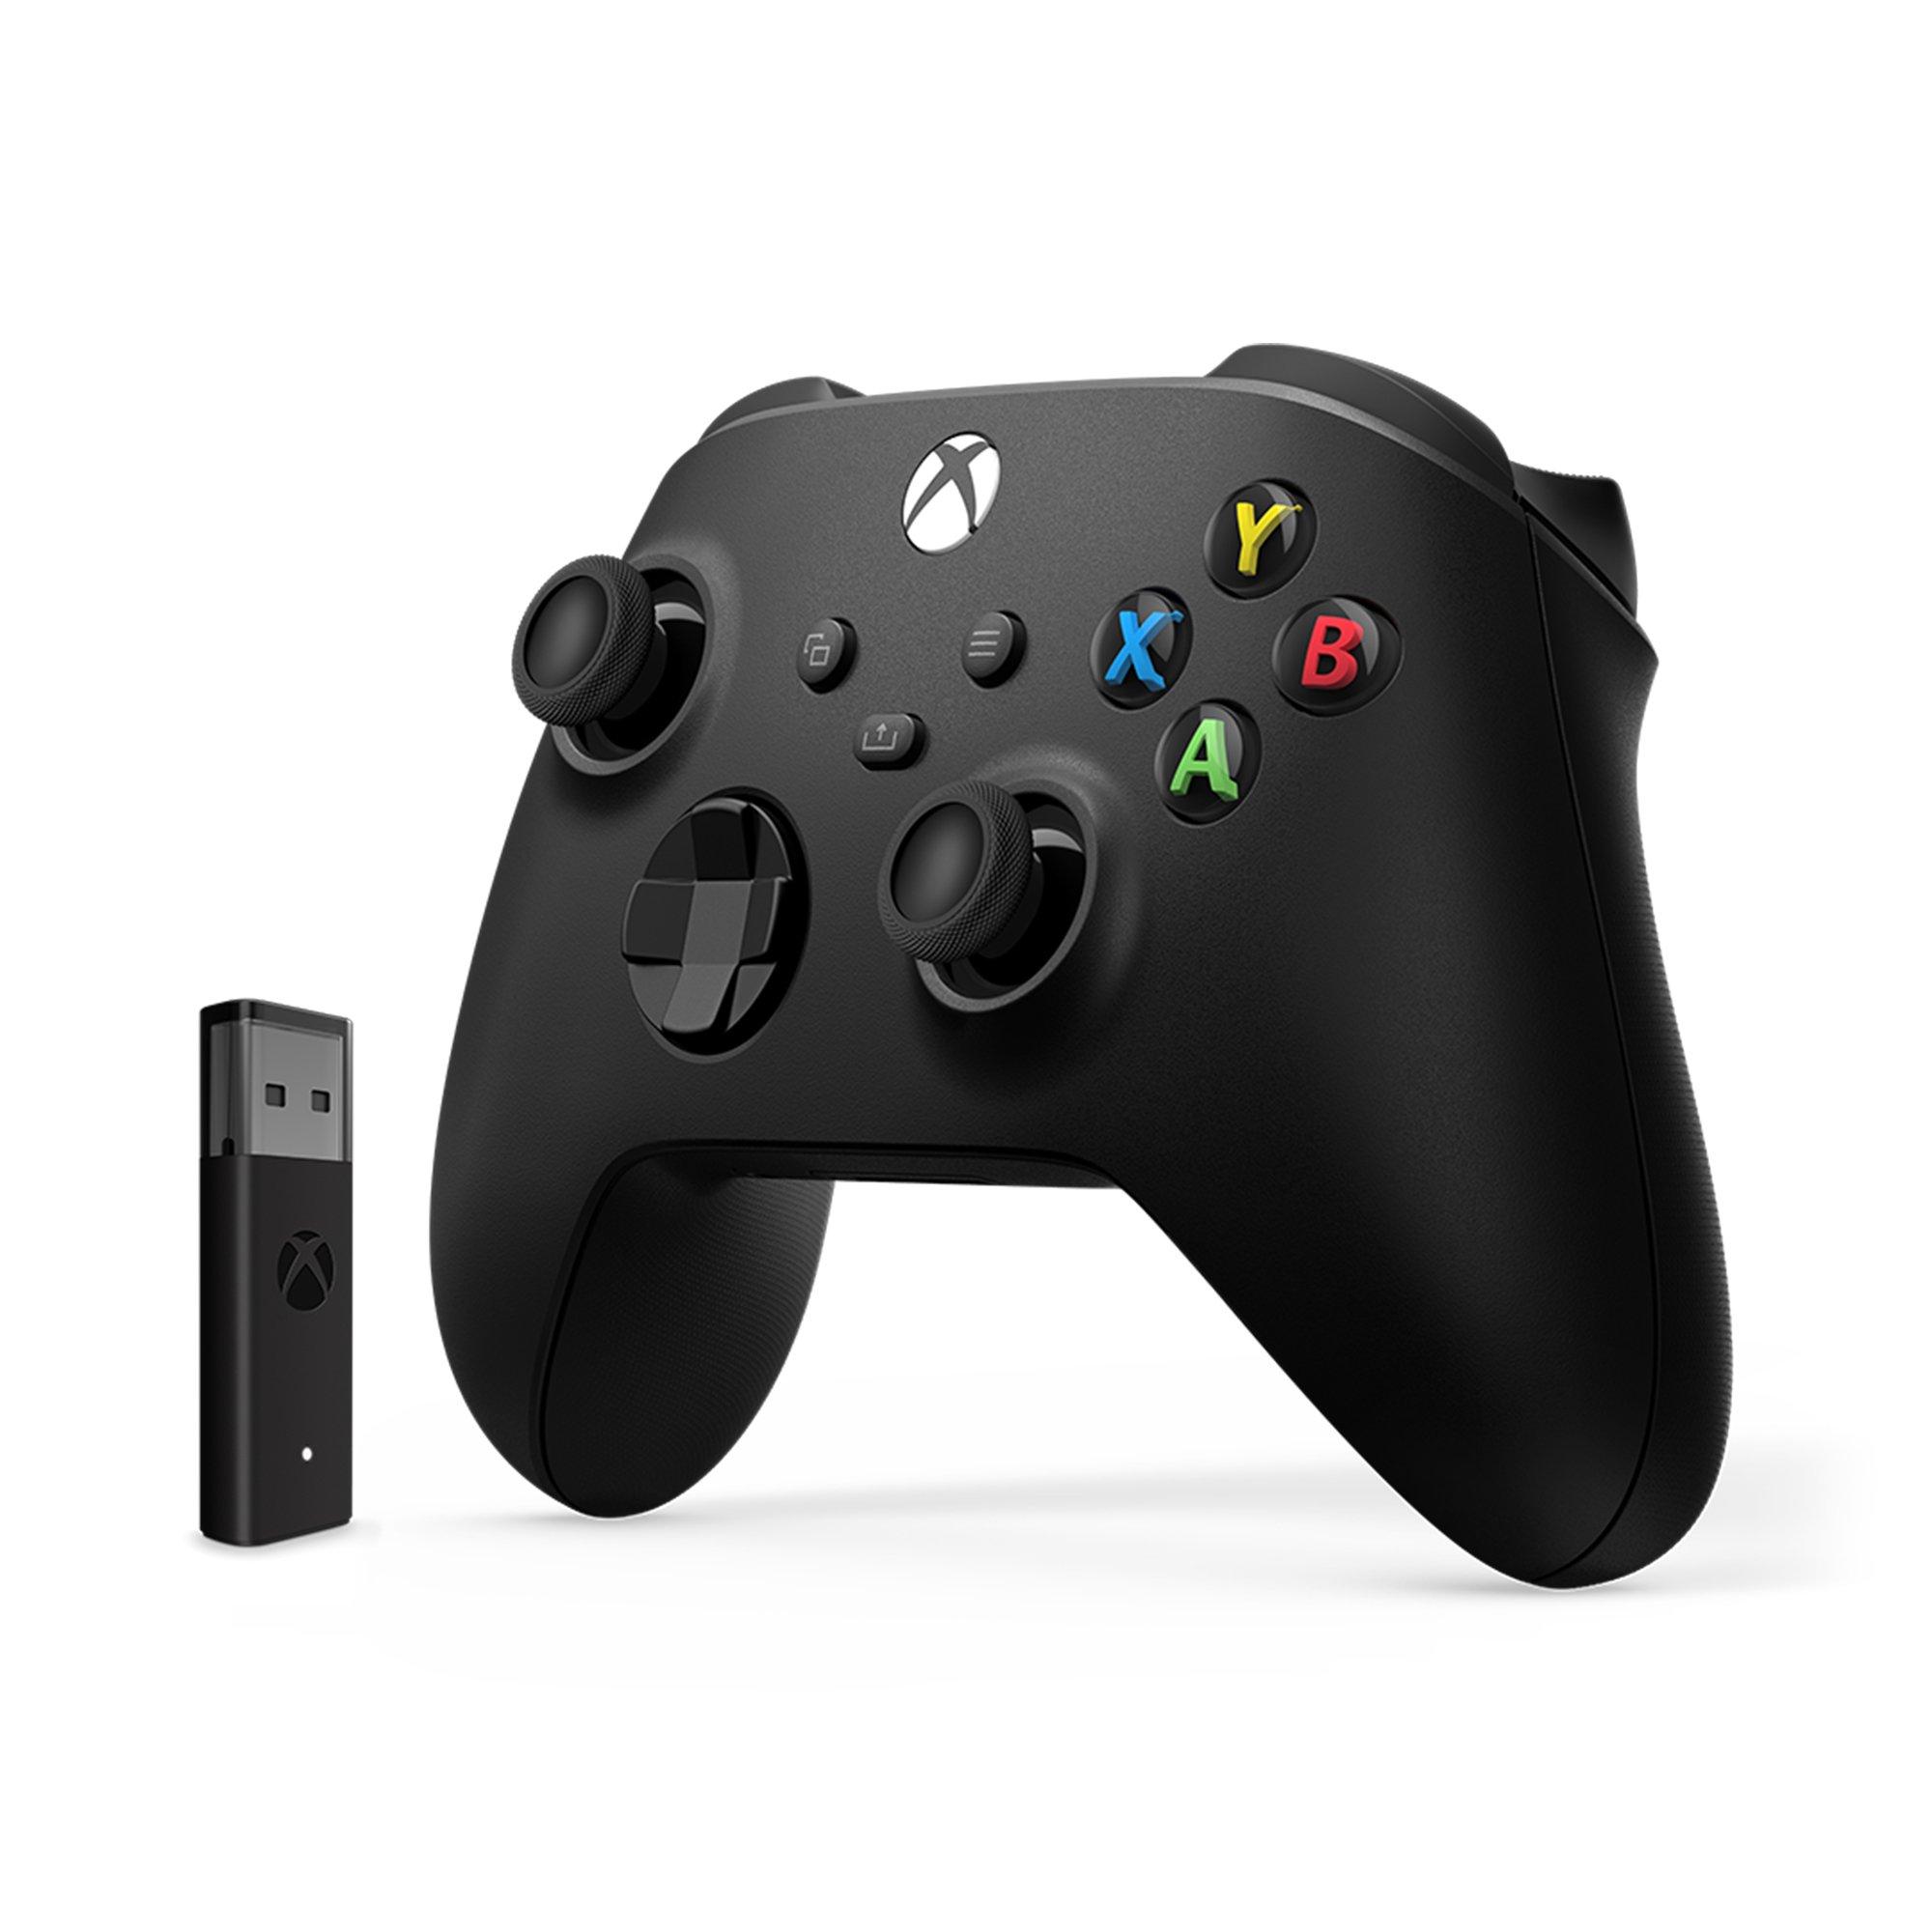 xbox one x controller wireless adapter